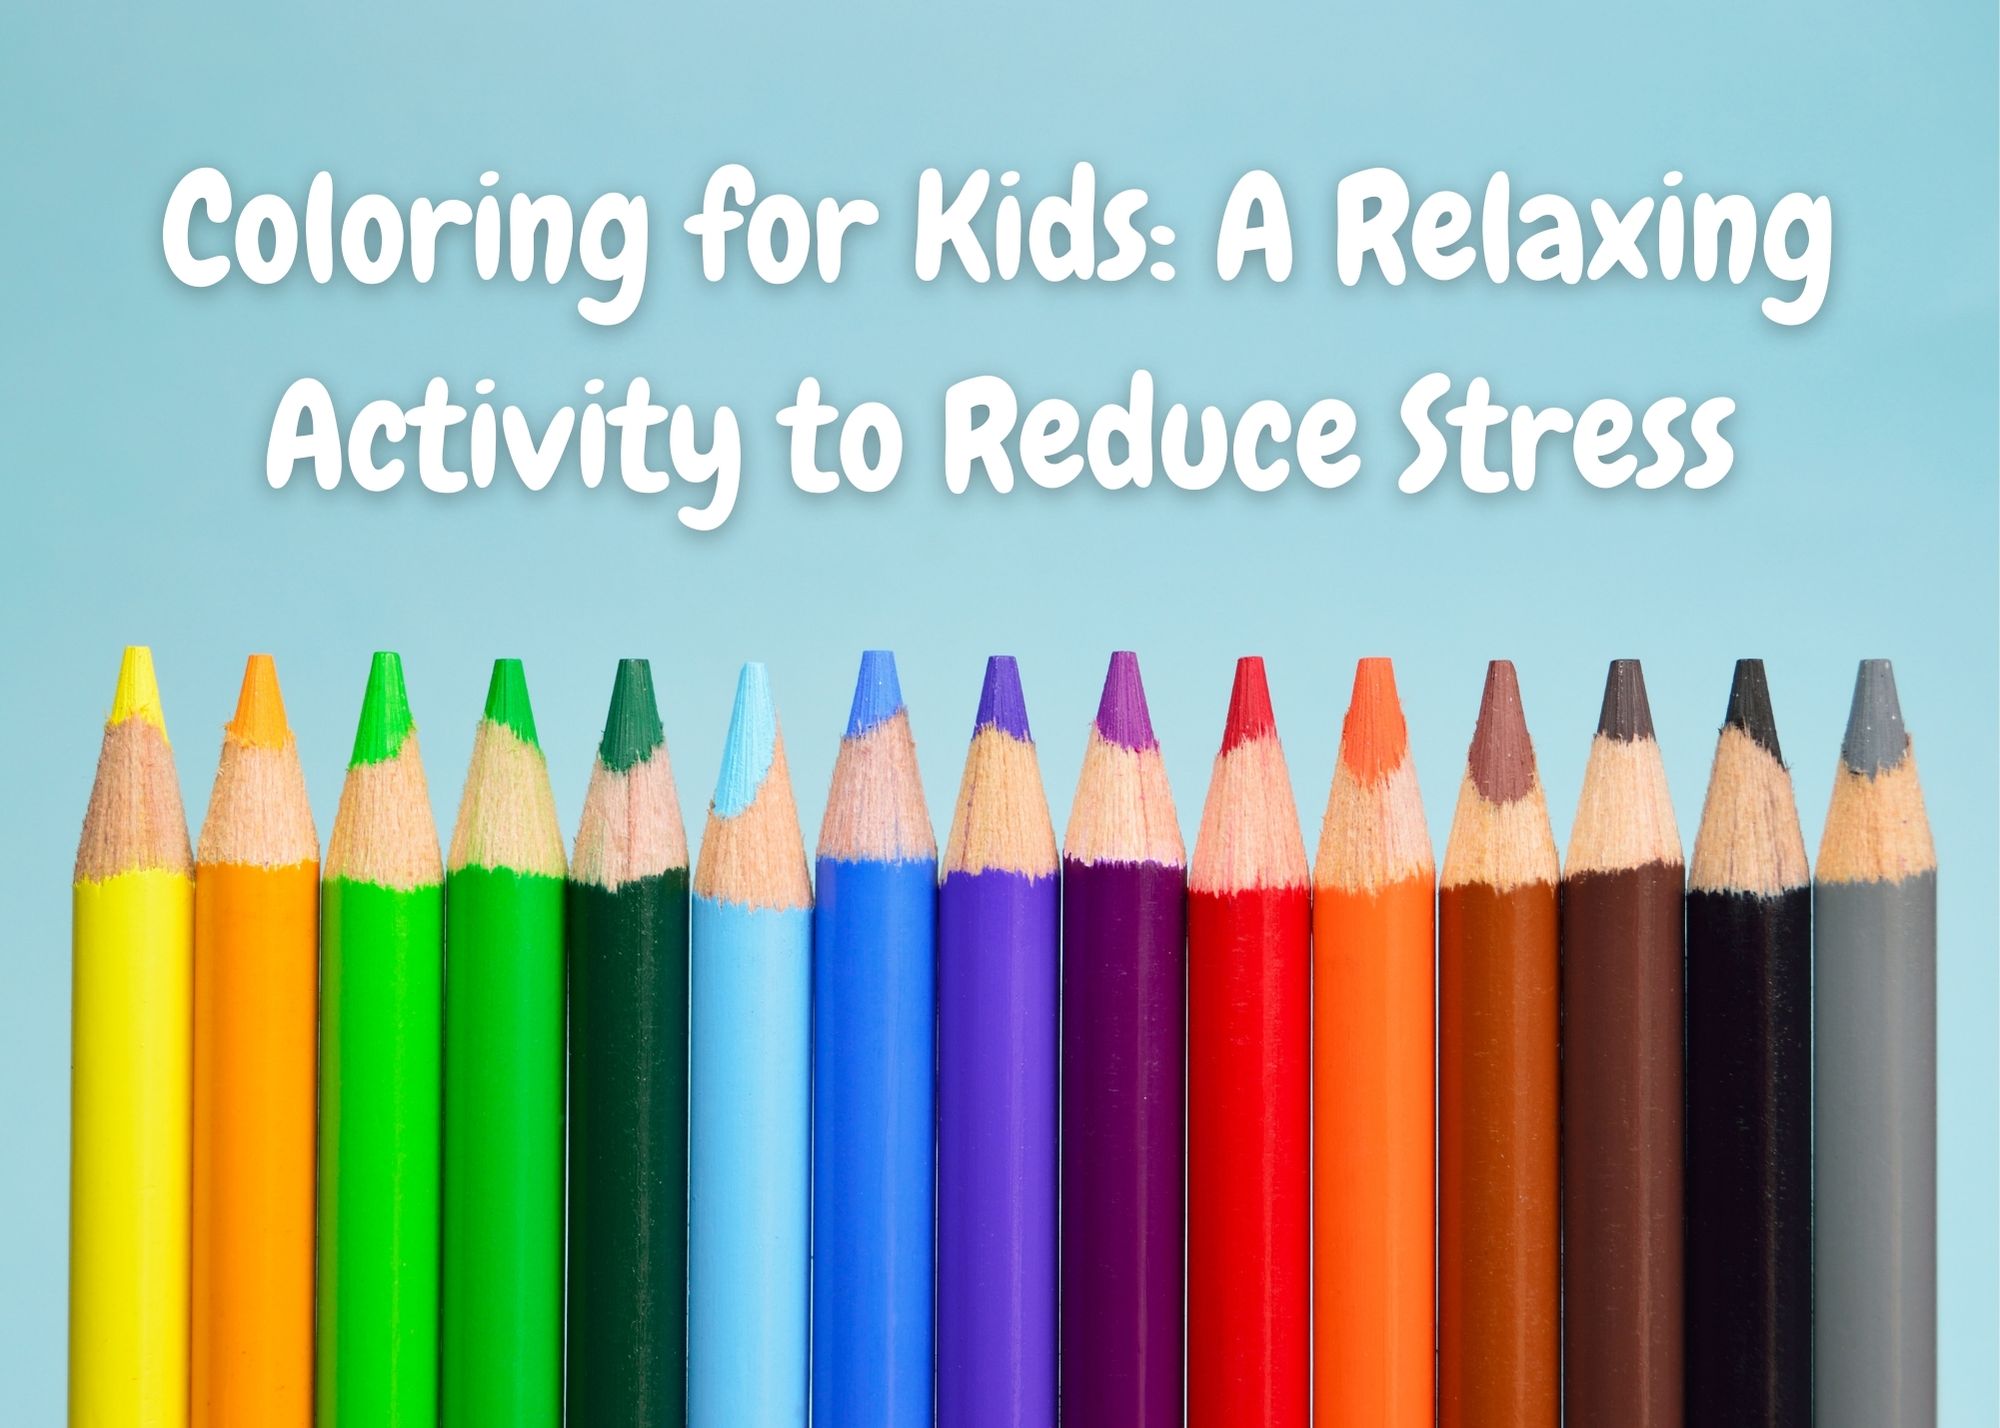 Coloring for Kids: A Relaxing Activity to Reduce Stress